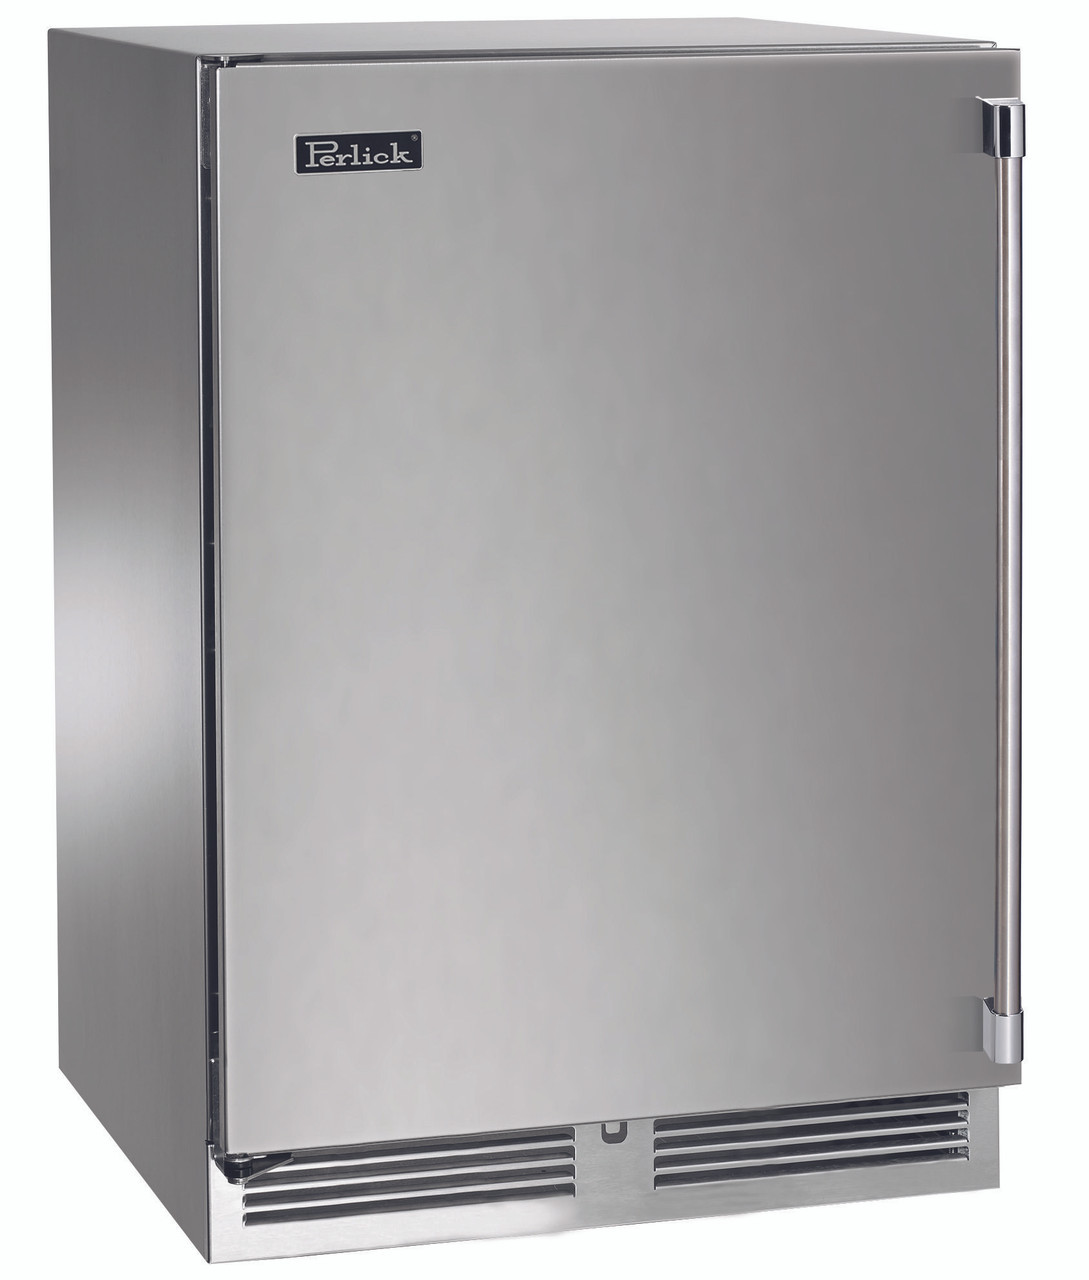 Perlick 24 Signature Series Outdoor 18 Shallow Depth Refrigerator with  Stainless Steel Solid Door - HH24RO-4-1